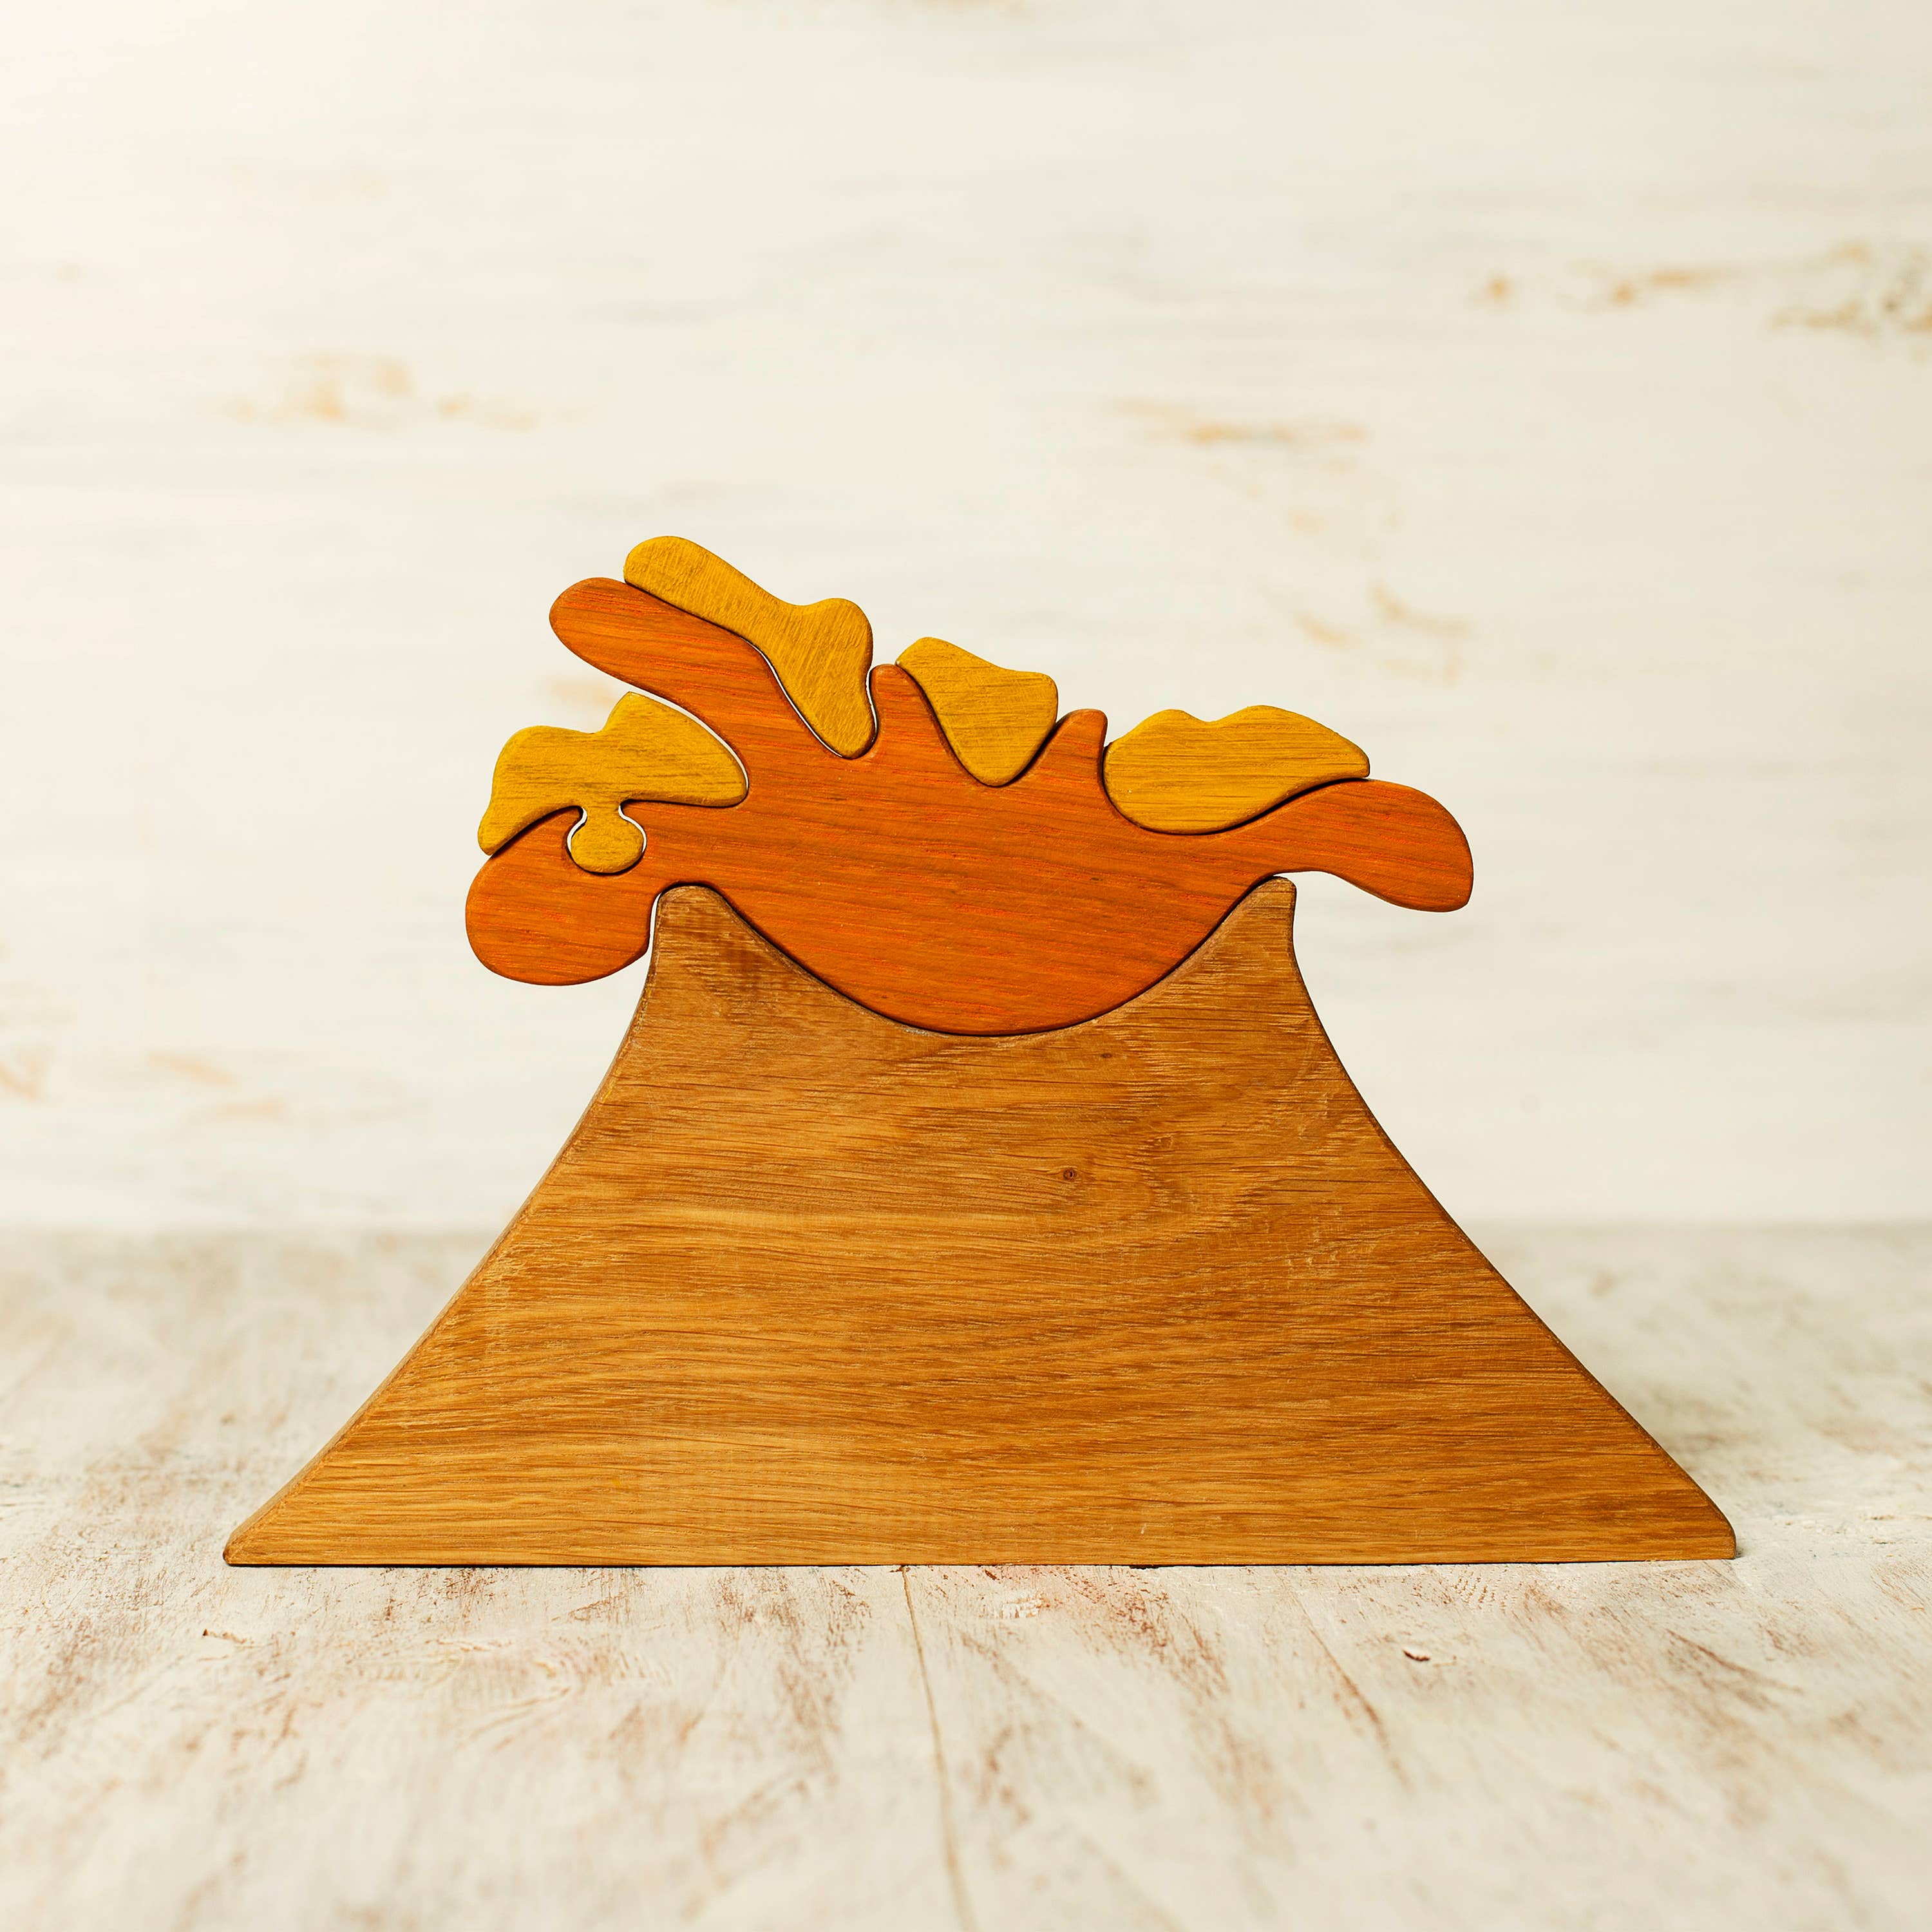 Volcano Wooden Puzzle toy Dinosaurs Playset